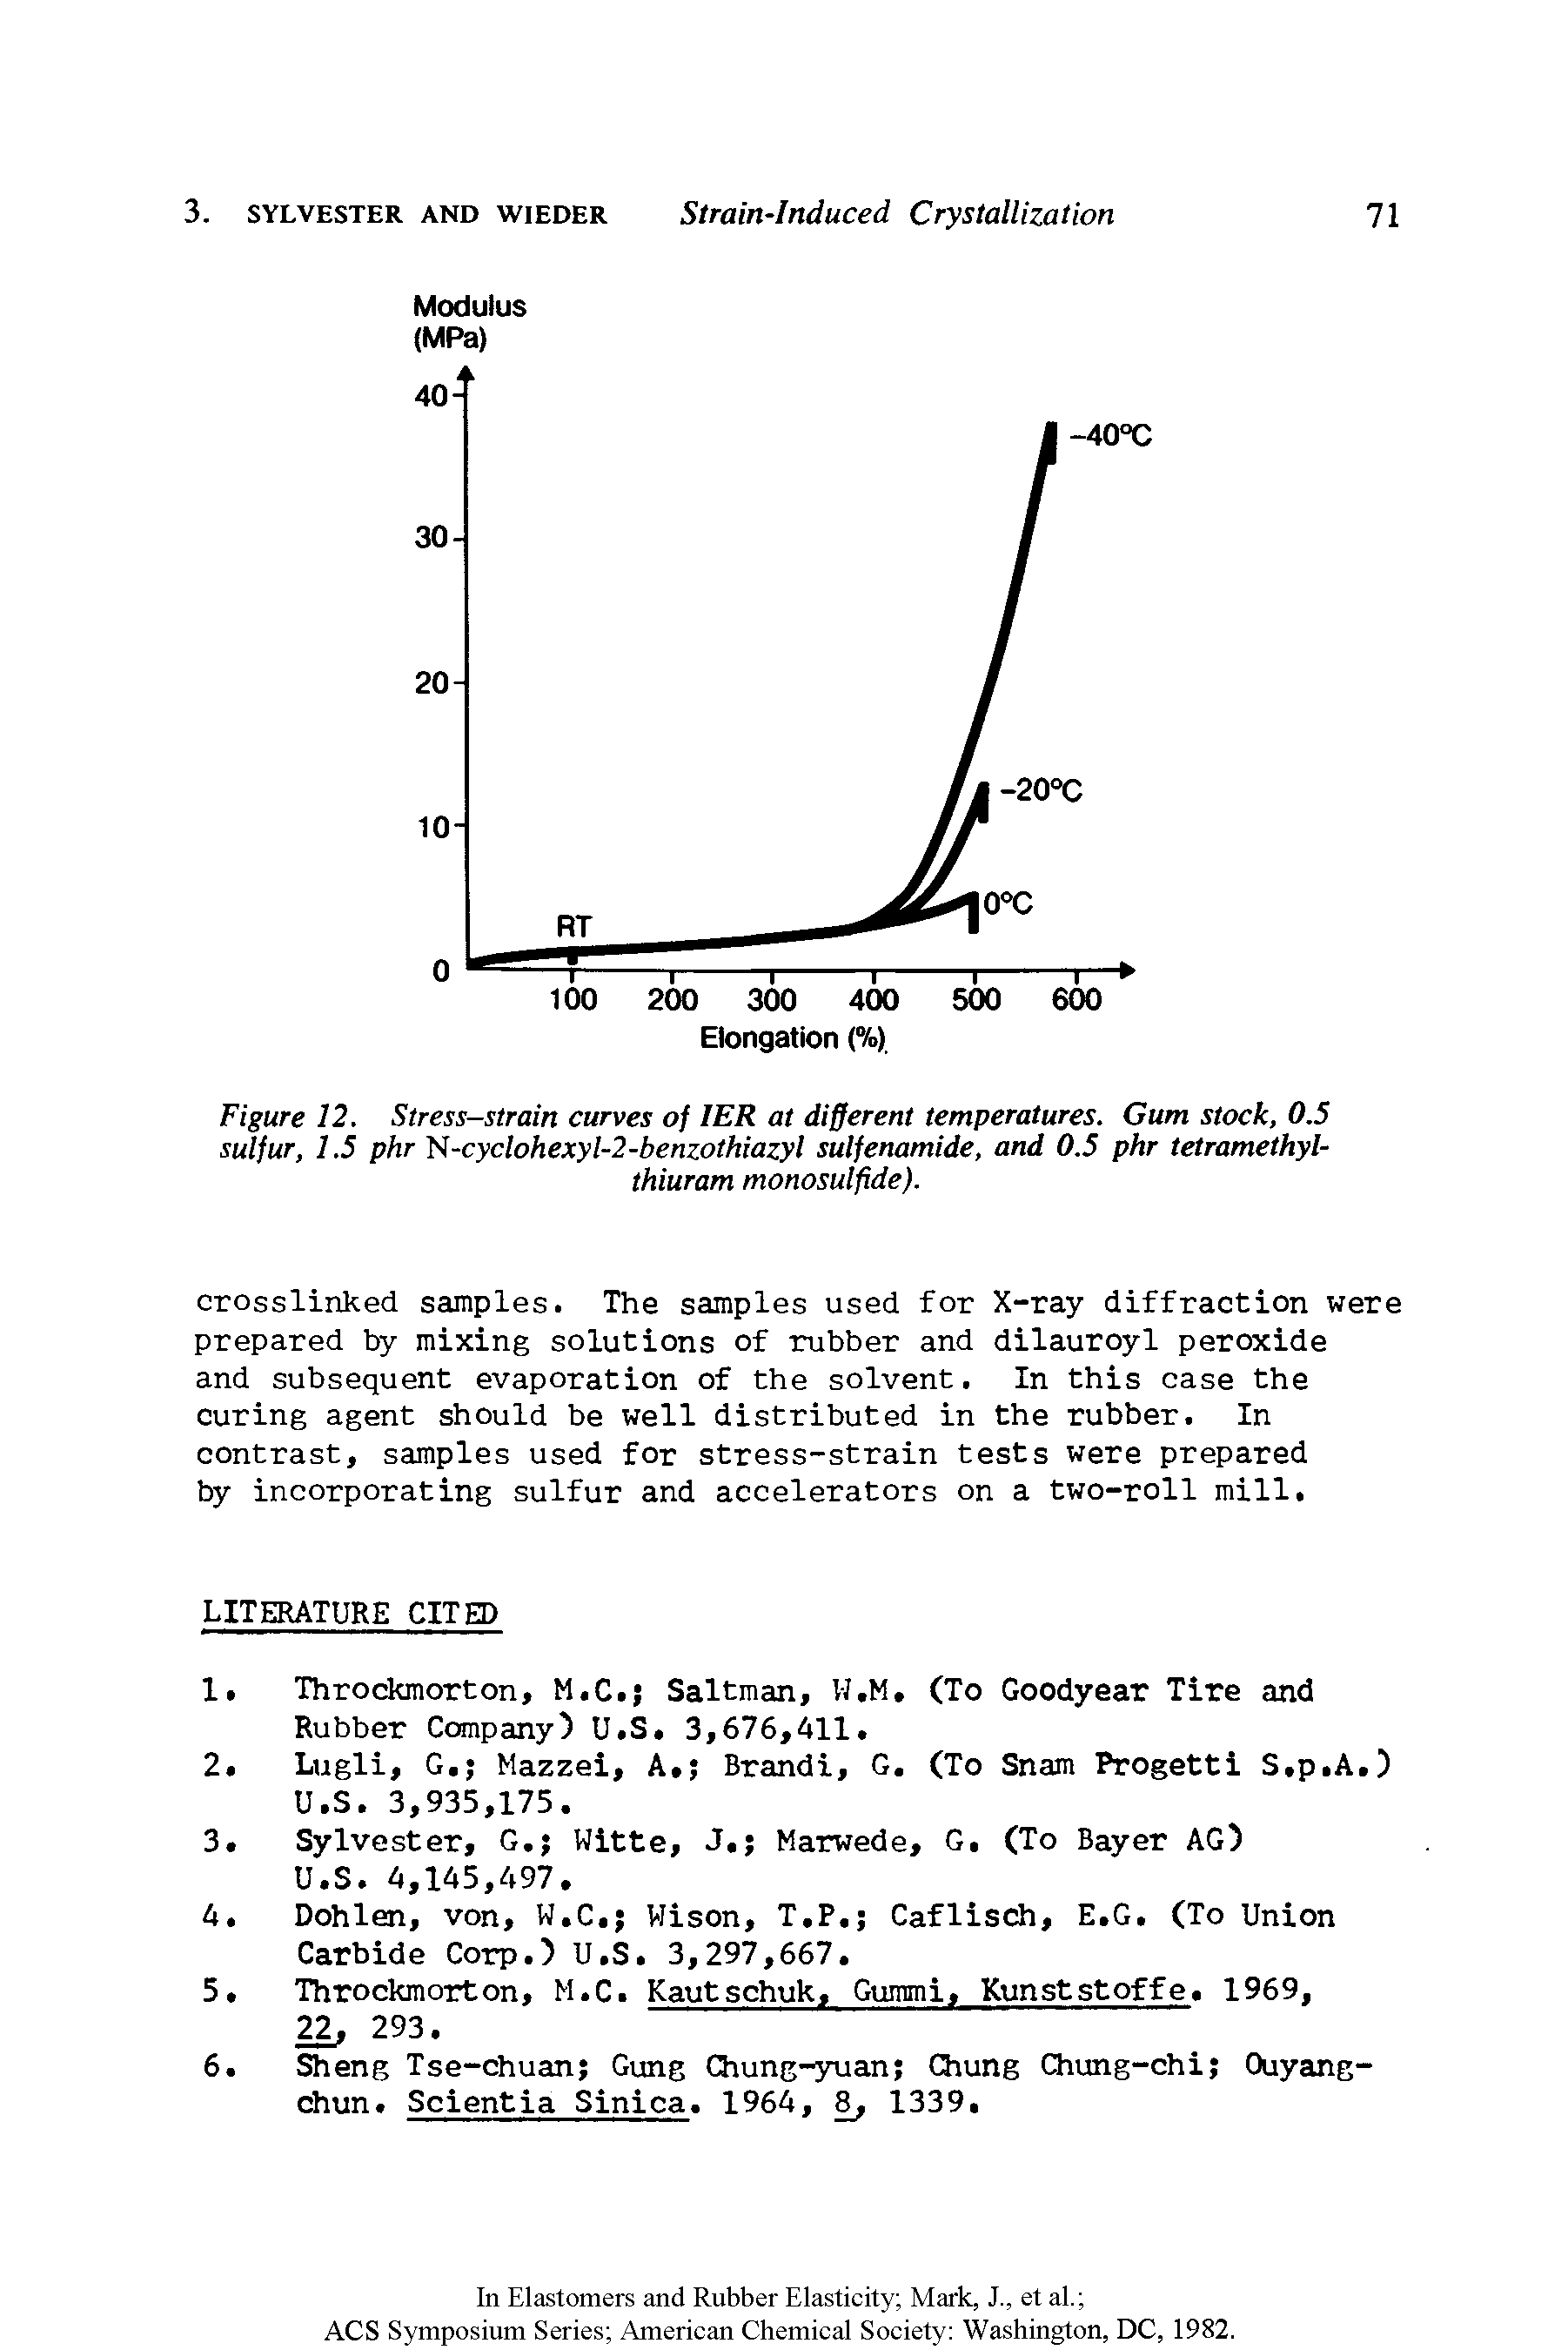 Figure 12. Stress-strain curves of IER at different temperatures. Gum stock, 0.5 sulfur, 1.5 phr N-cyclohexyl-2-benzothiazyl sulfenamide, and 0.5 phr tetramethyl-...